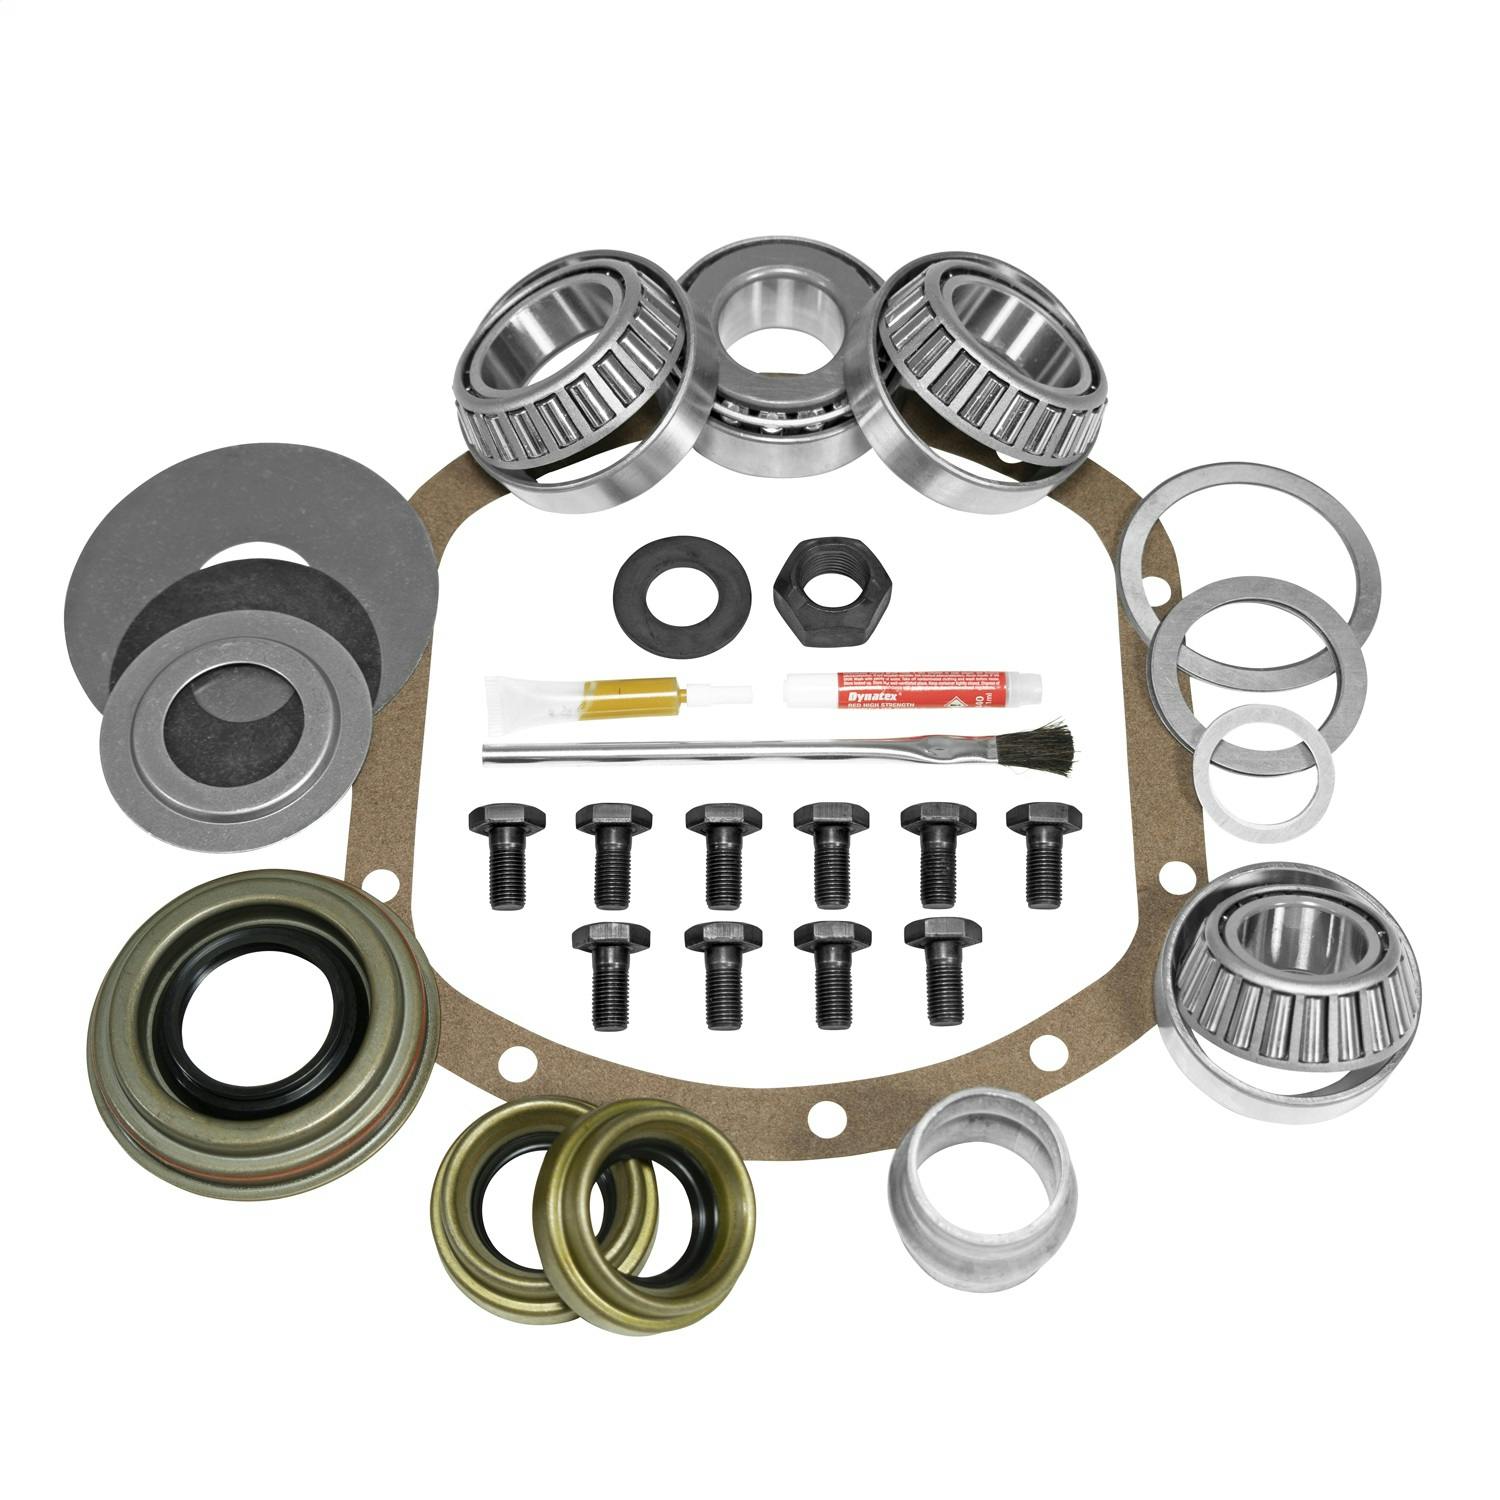 USA Standard Gear ZK D30-SUP-FORD-B Differential Rebuild Kit